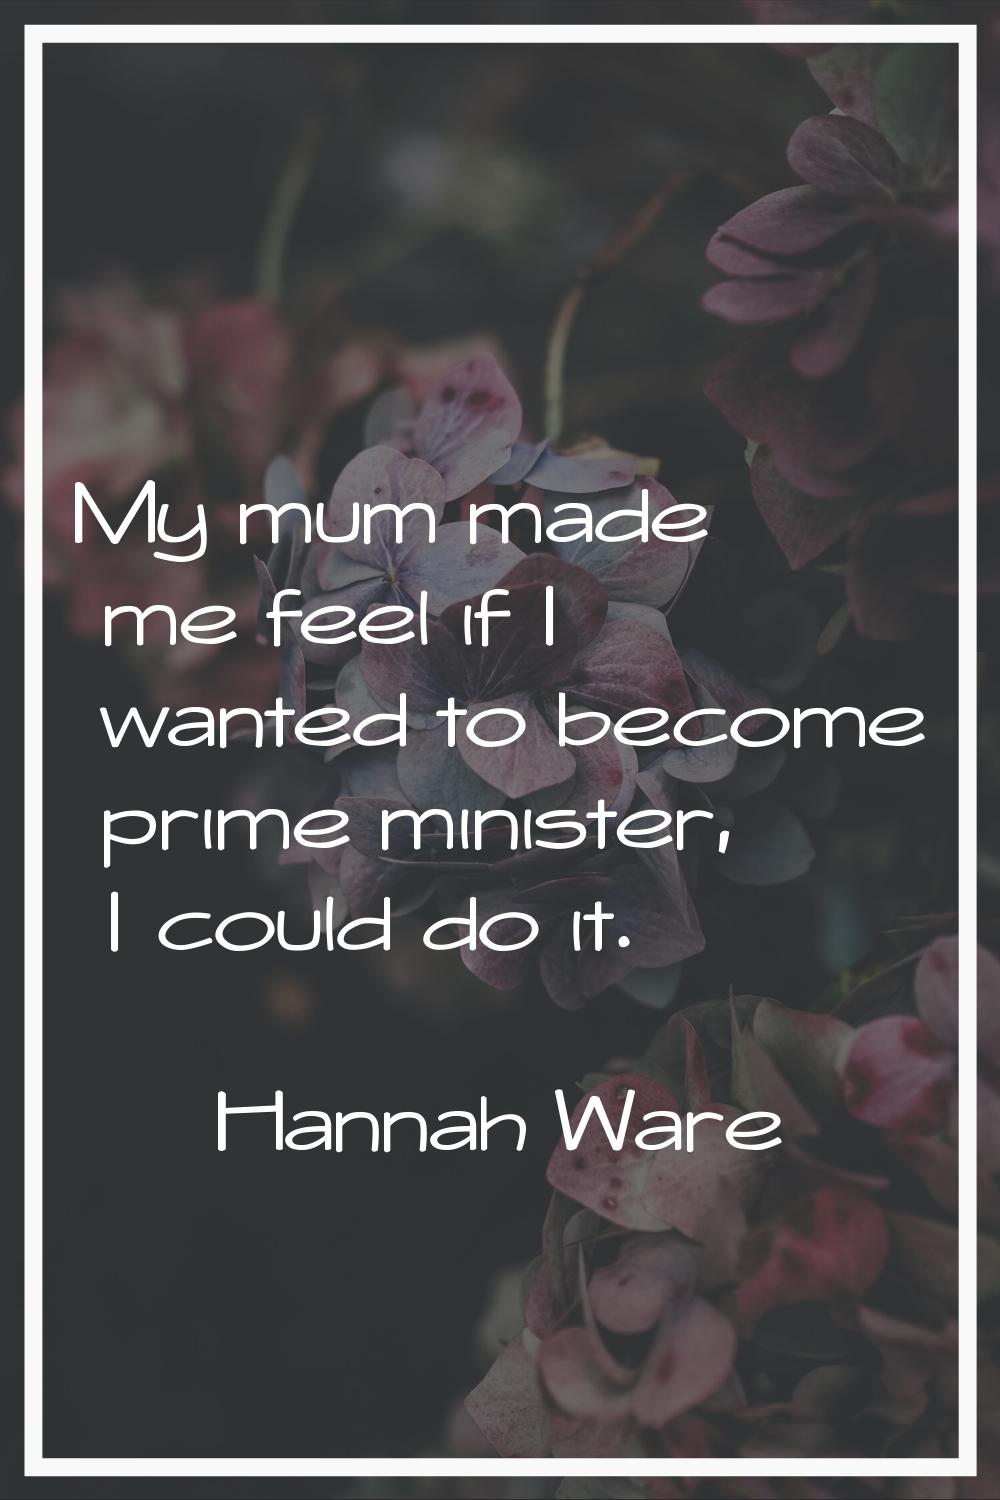 My mum made me feel if I wanted to become prime minister, I could do it.